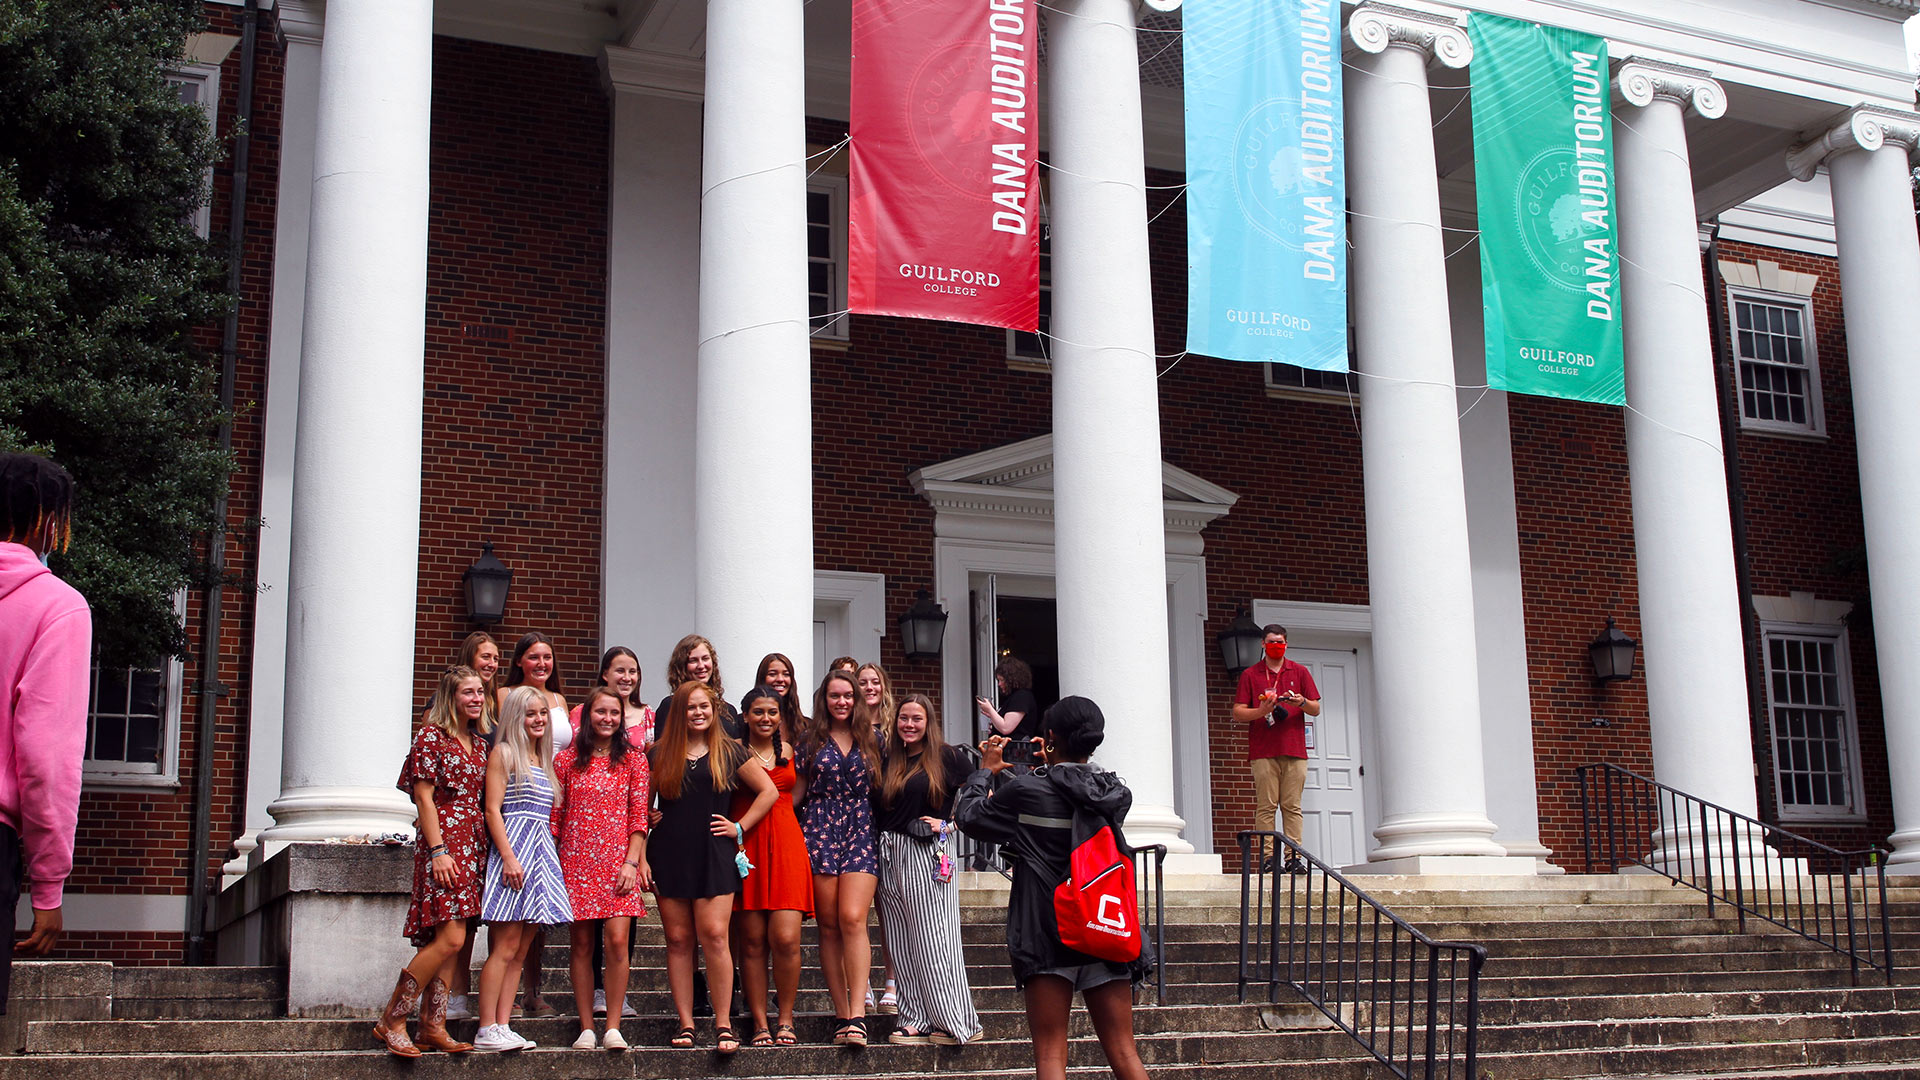 A group of about 12 students takes a group photo on the steps of Dana Auditorium after Convocation.